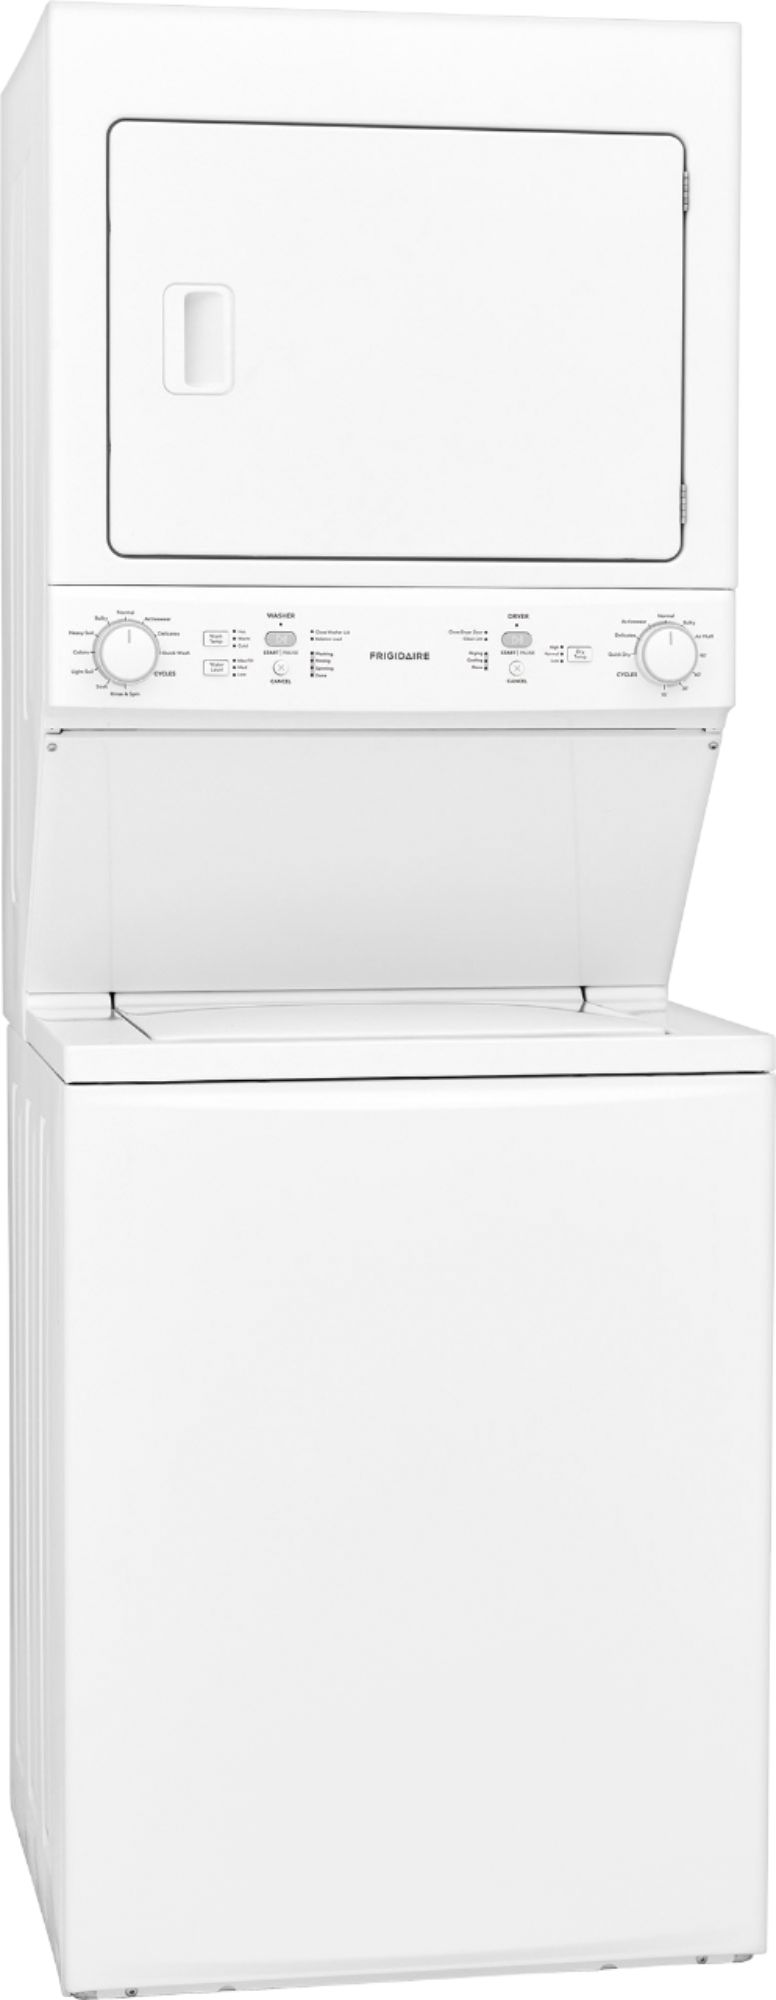 Angle View: Frigidaire - 3.9 Cu. Ft. 10-Cycle Washer and 5.5 Cu. Ft. 4-Cycle Dryer Gas Laundry Center - White